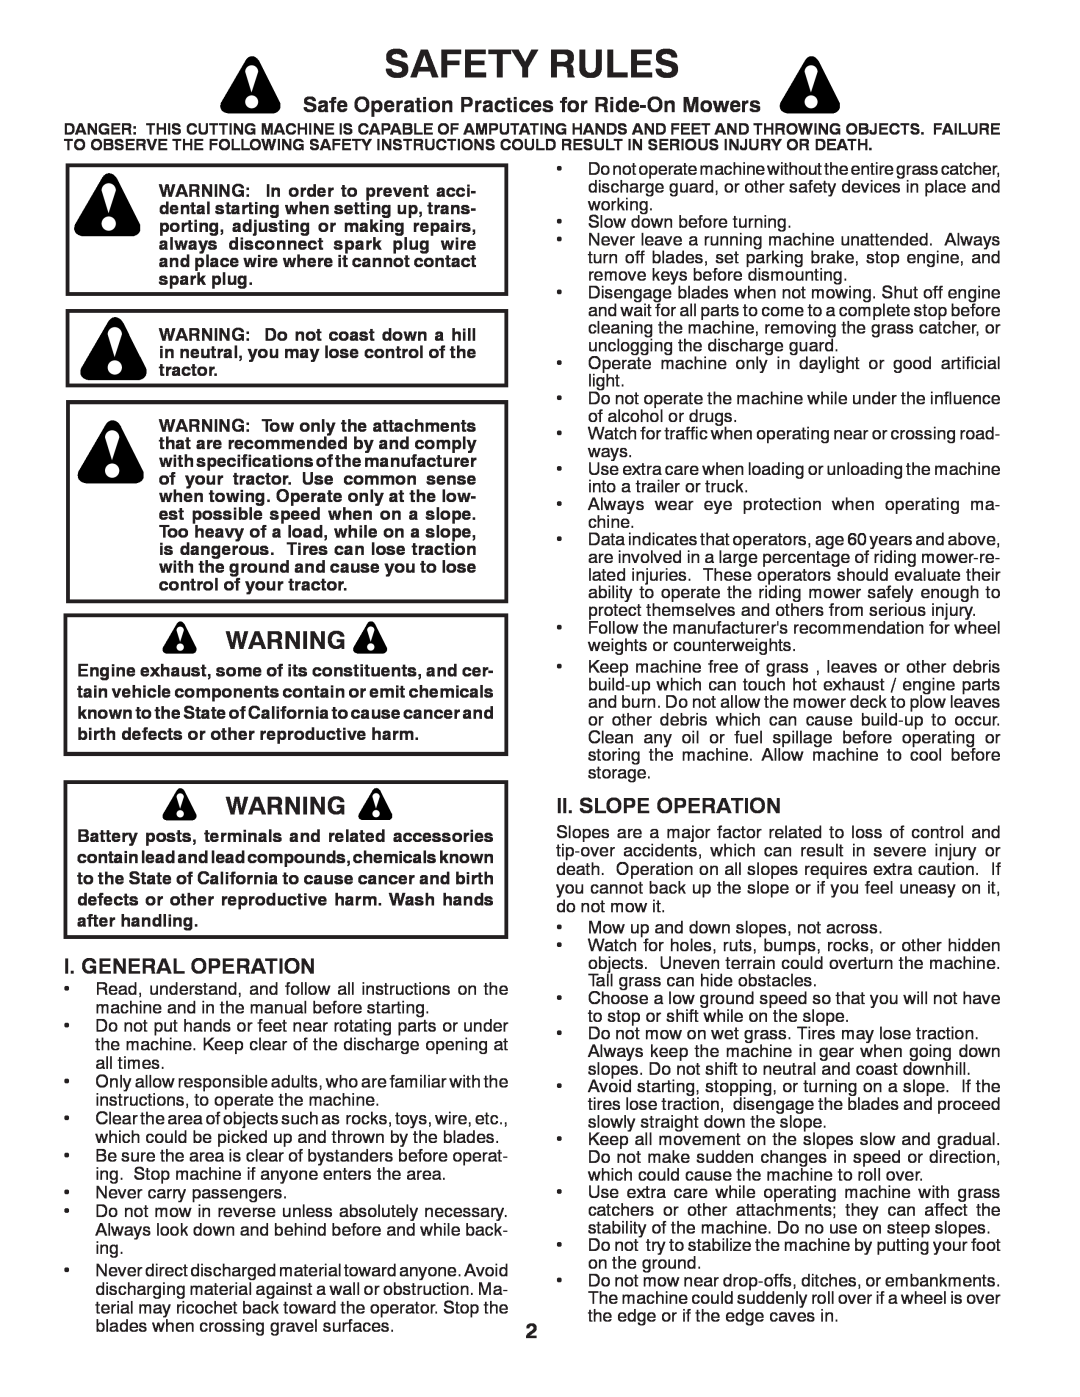 McCulloch 422800 Safety Rules, Safe Operation Practices for Ride-On Mowers, I. General Operation, Ii. Slope Operation 